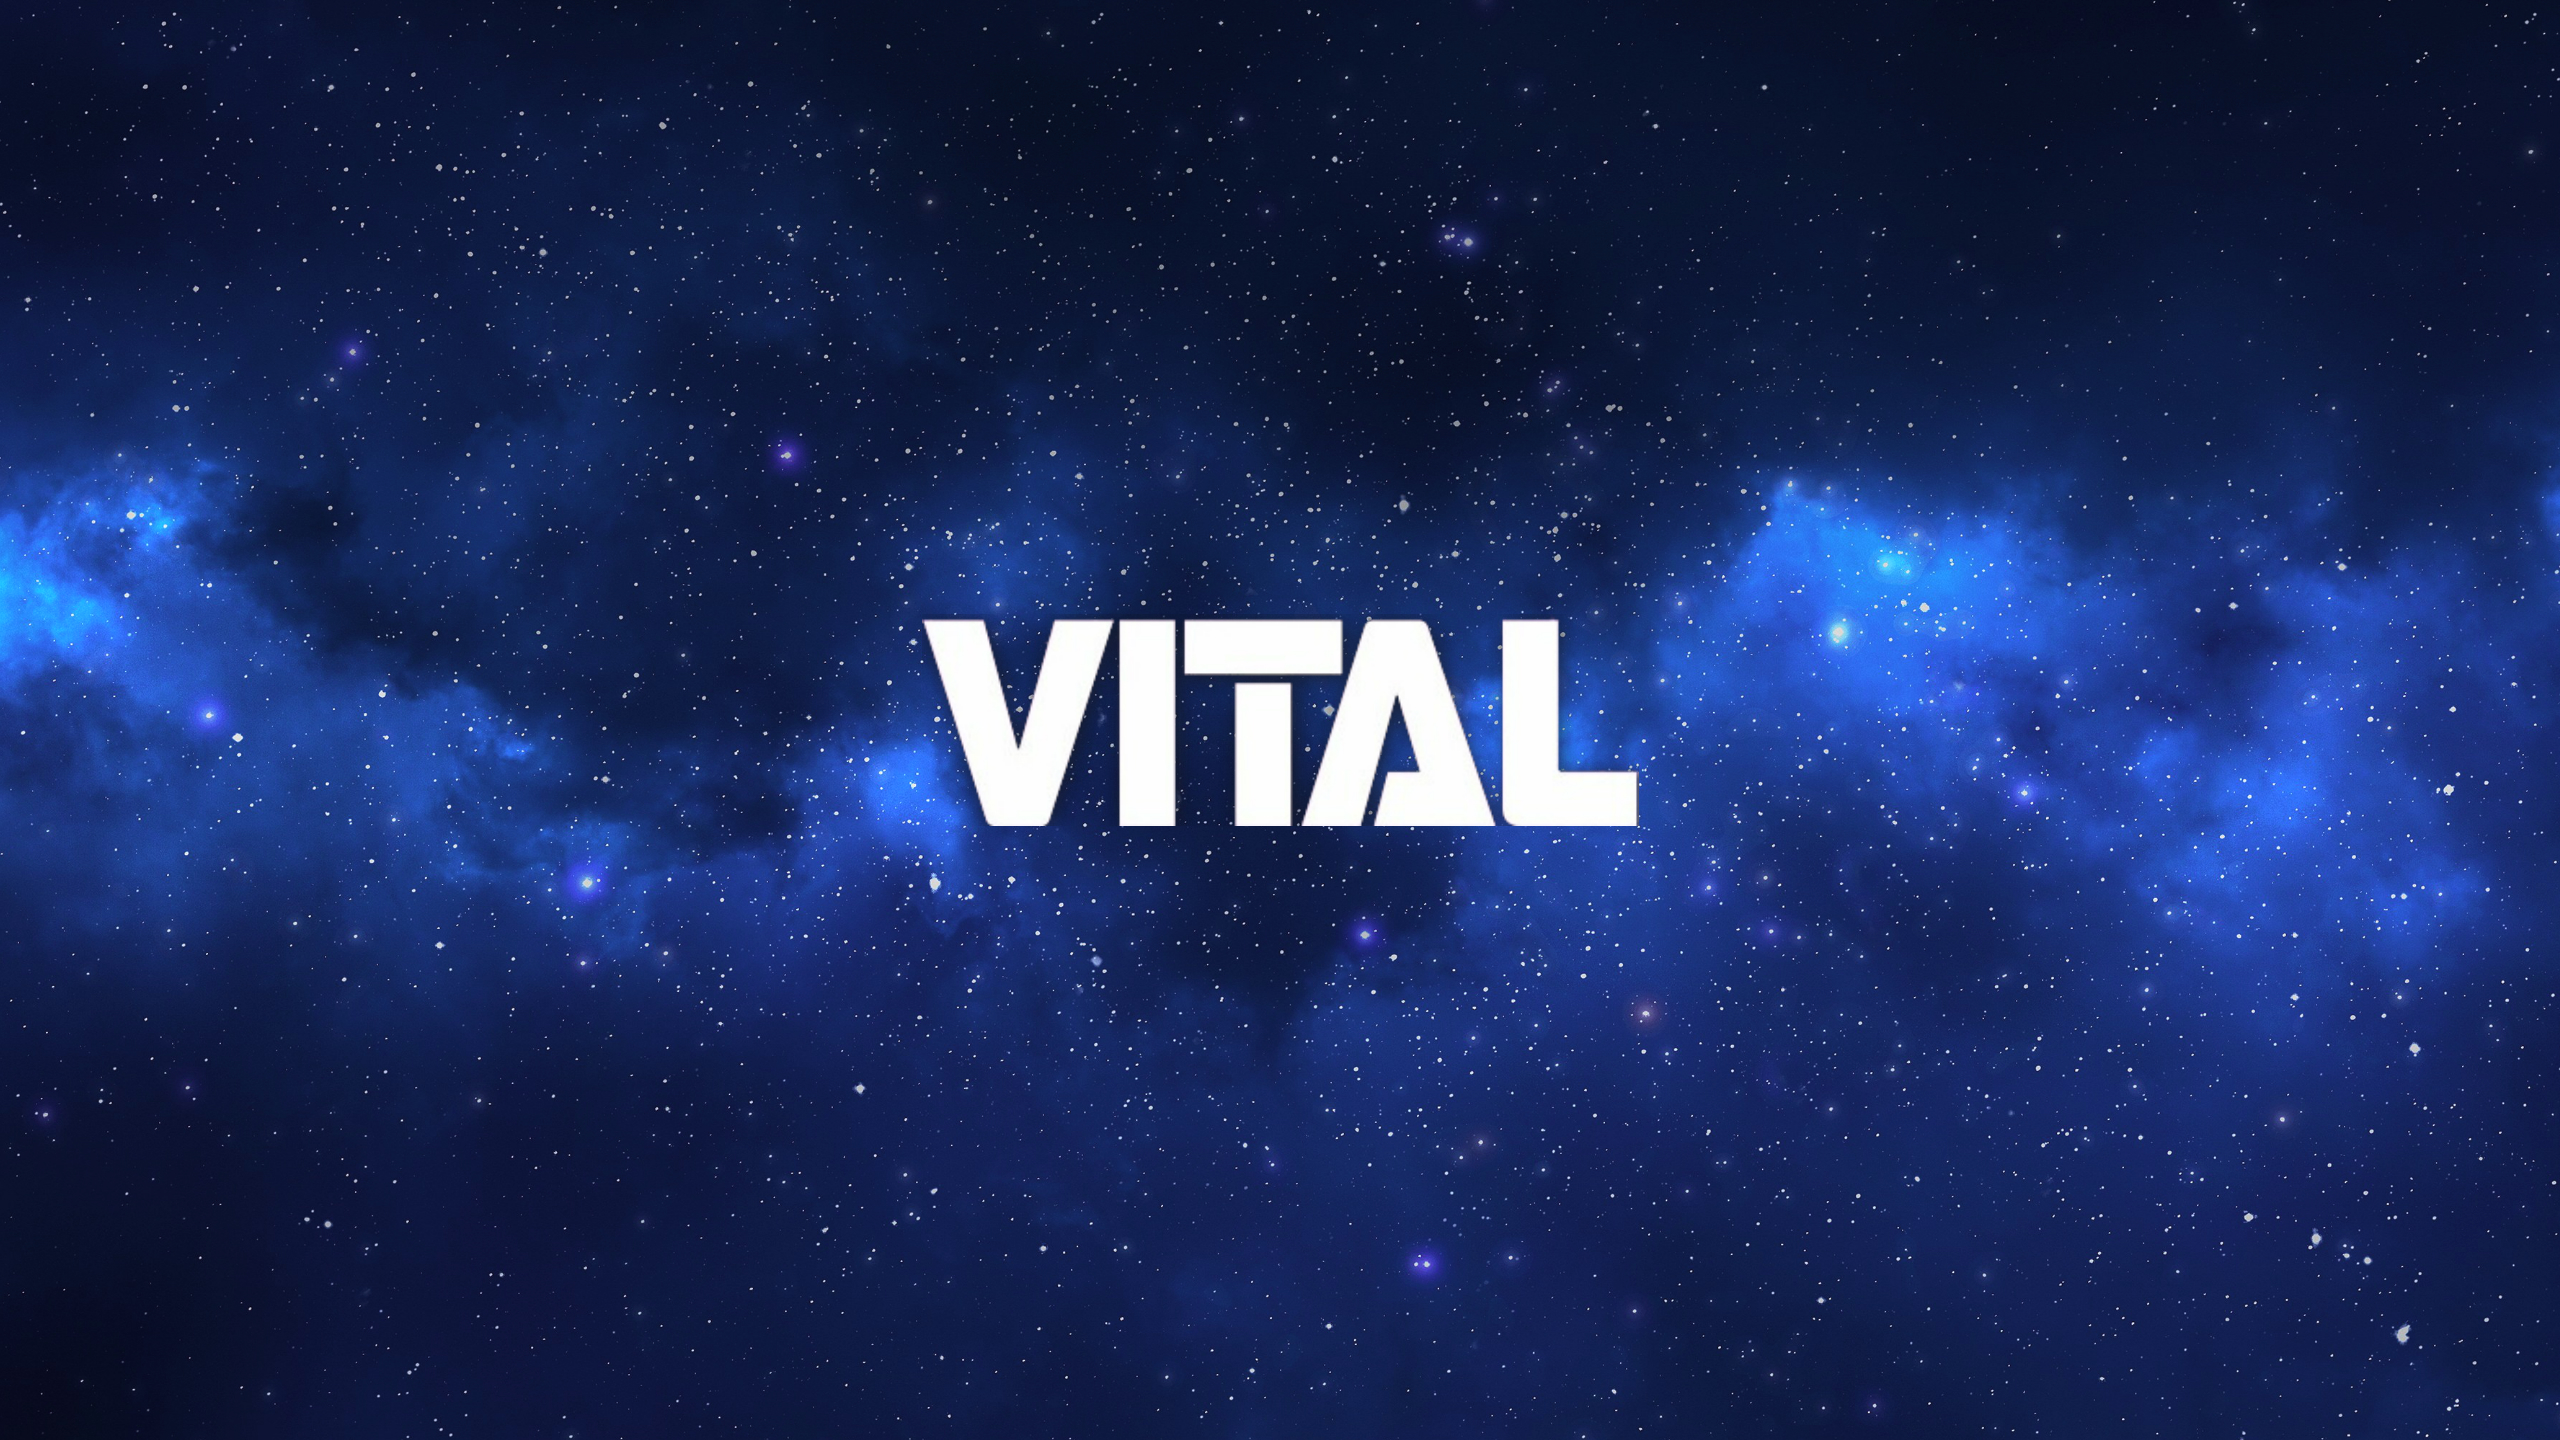 Find the hottest new dance music coming out on Vital EDM